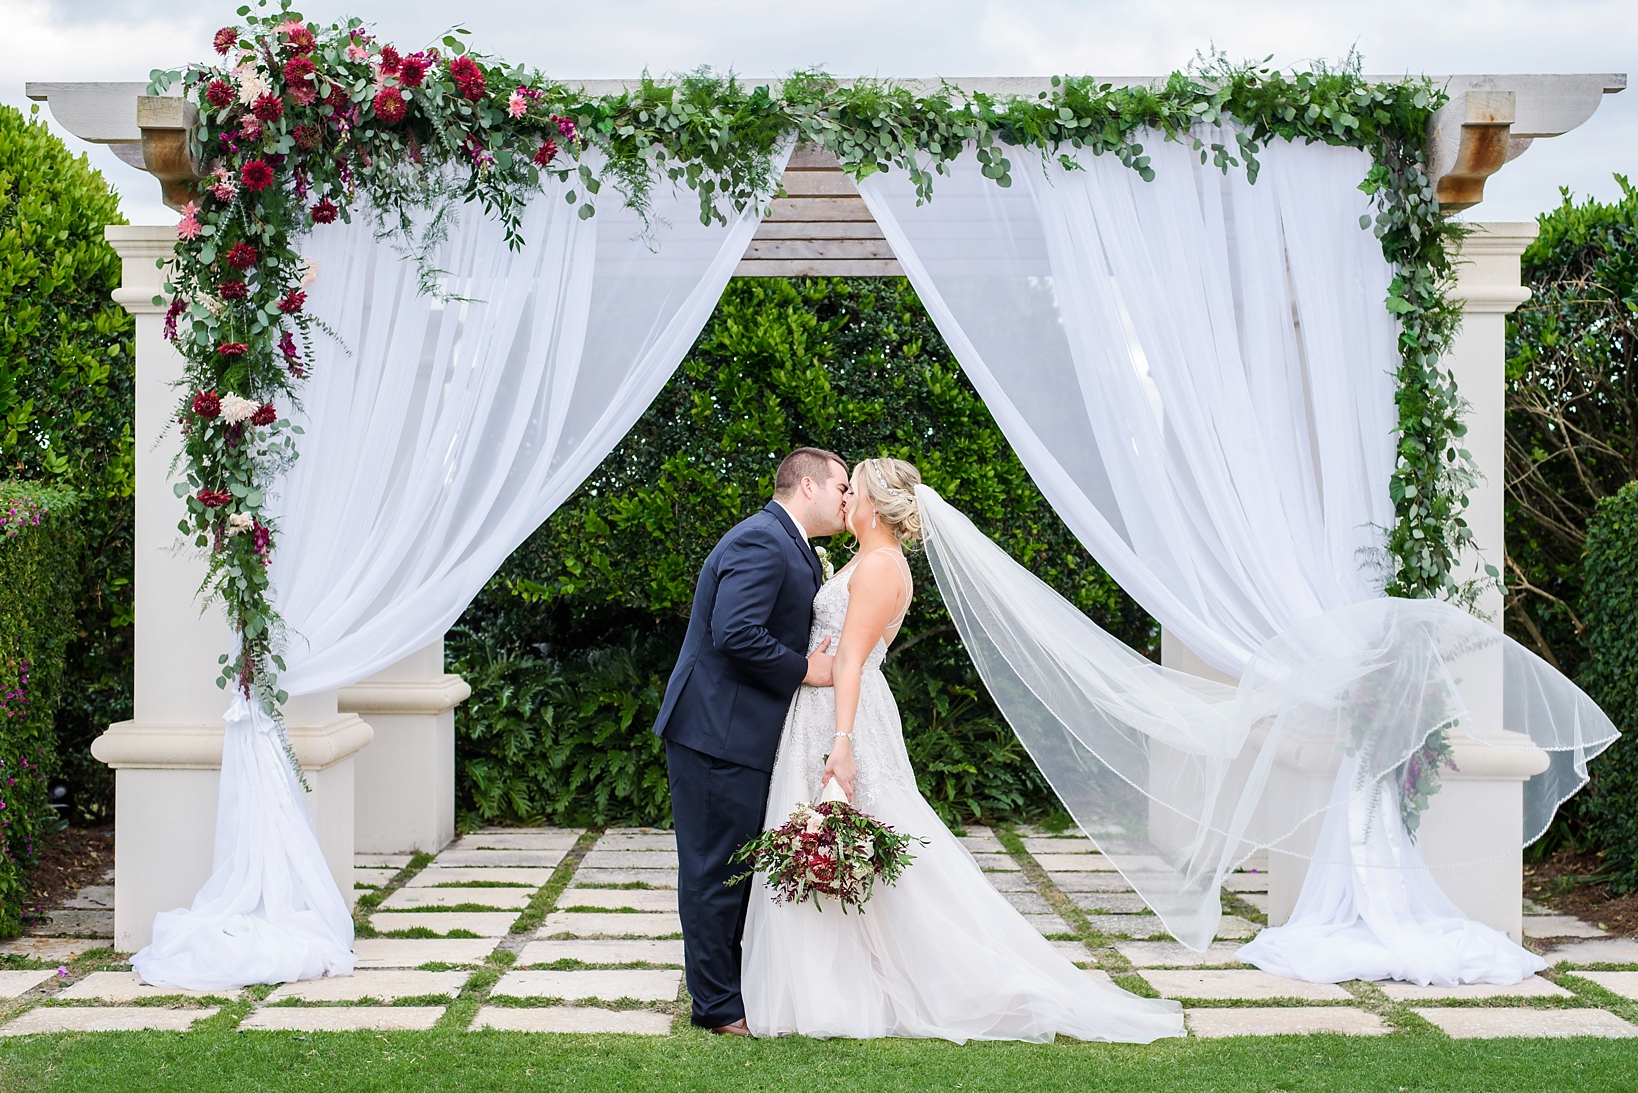 Bride and Groom kiss under their wedding arch decorated in florals as the wind blows her veil